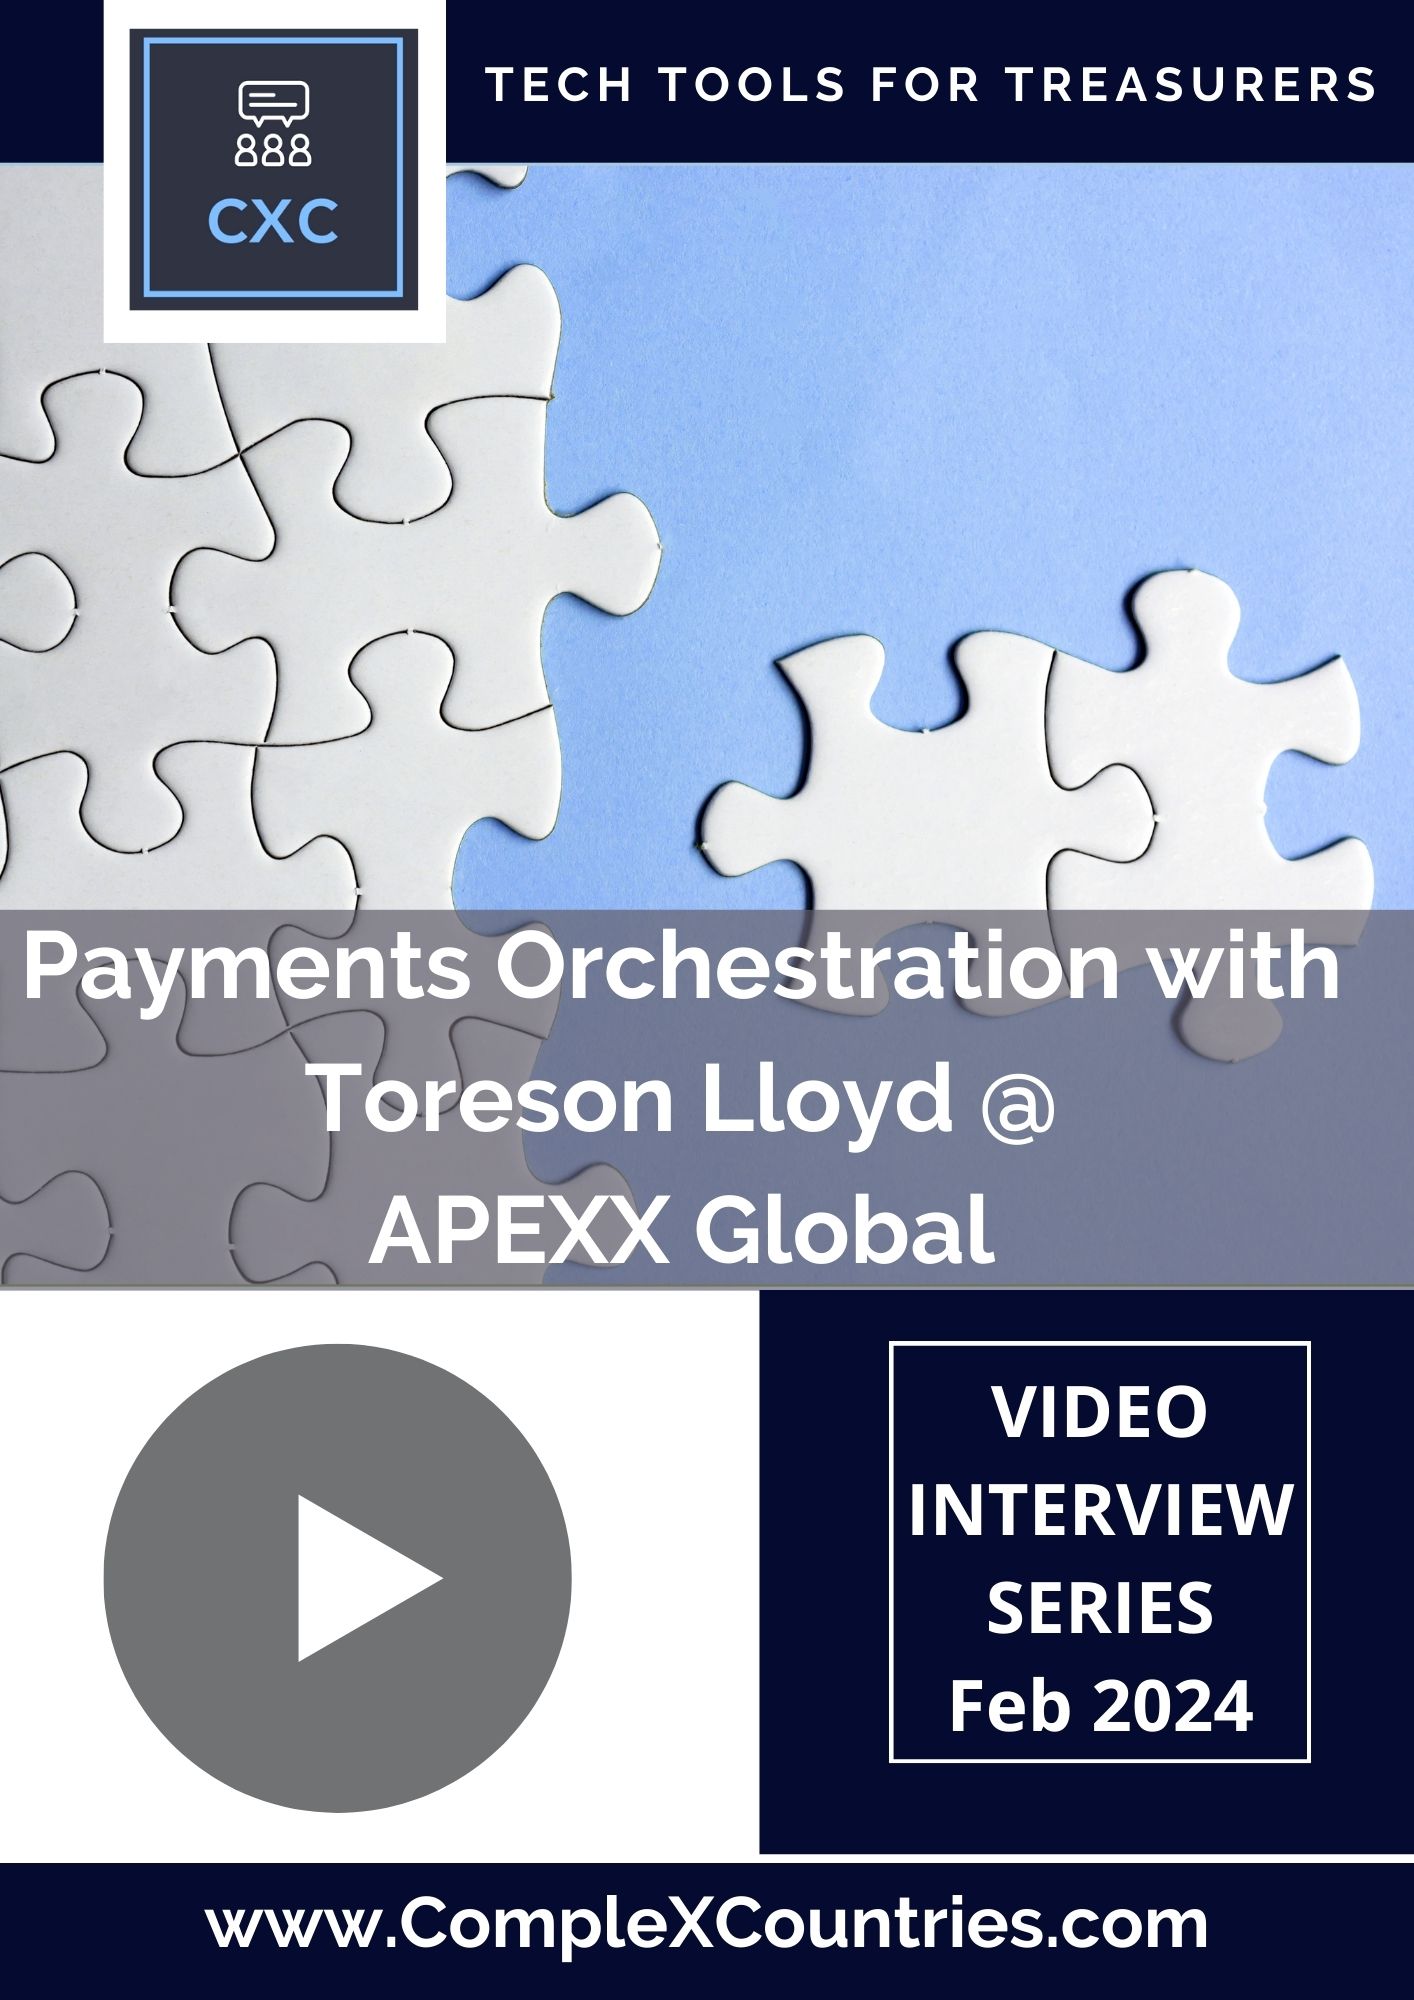 Tech tools for Treasurers E1: Payments Orchestration.